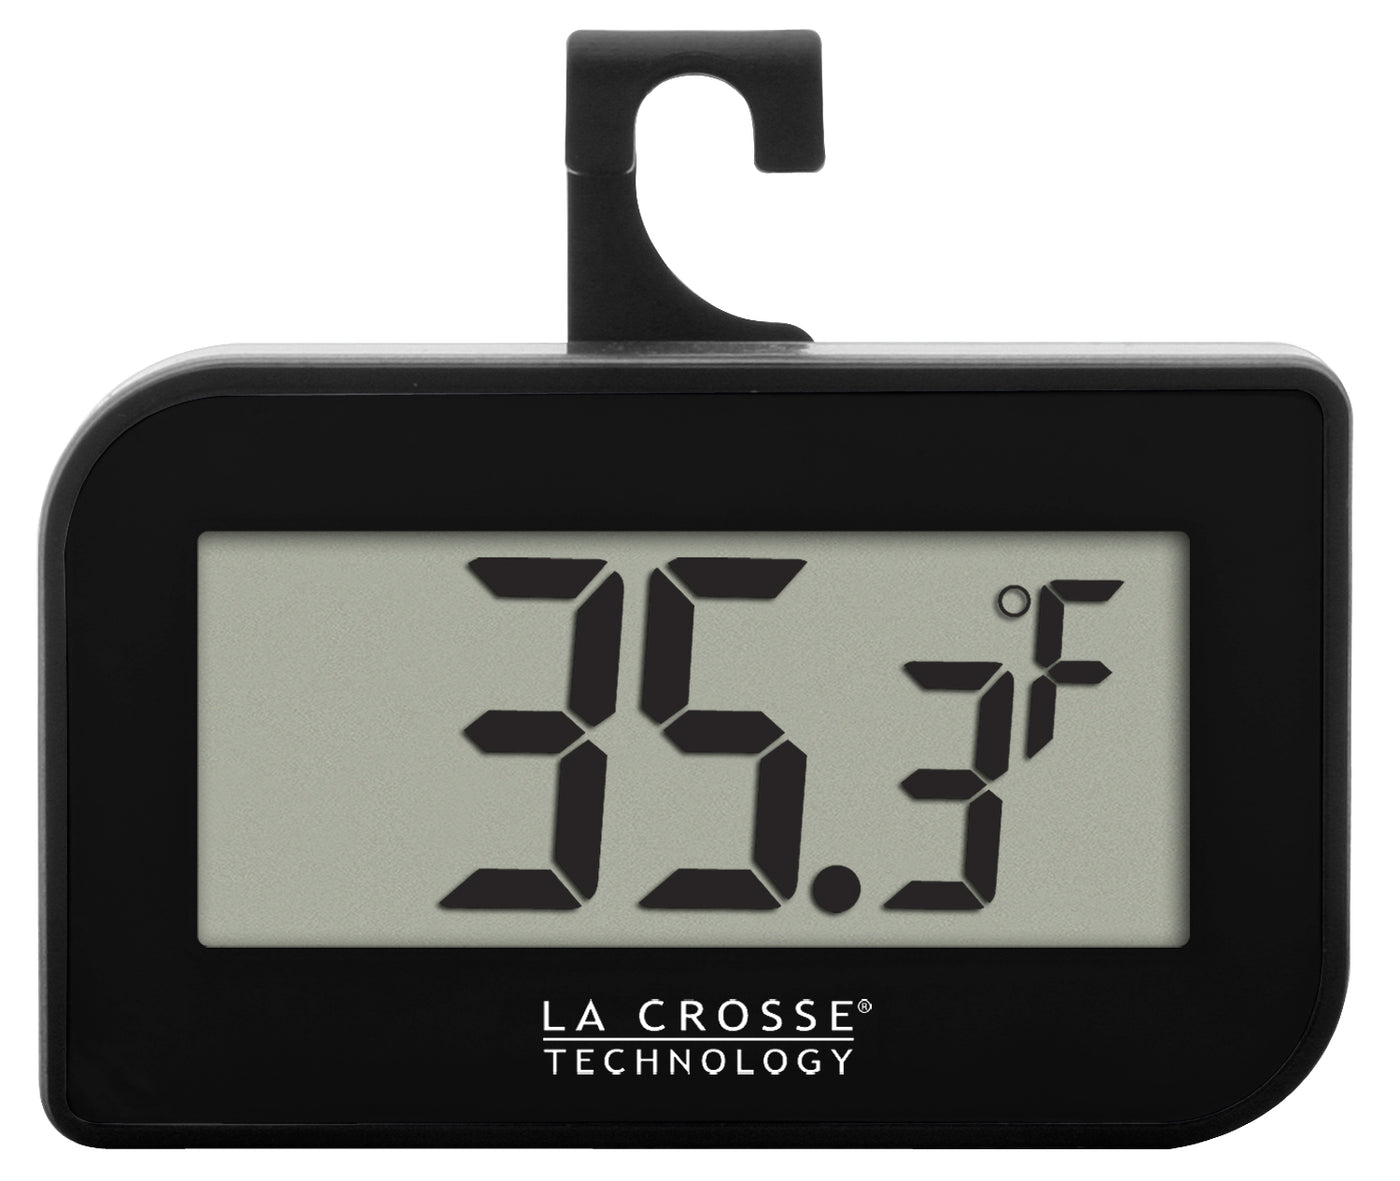 Dial Thermometer, 25°— 125°F and 0°— 50°C for Lab - Gilson Co.